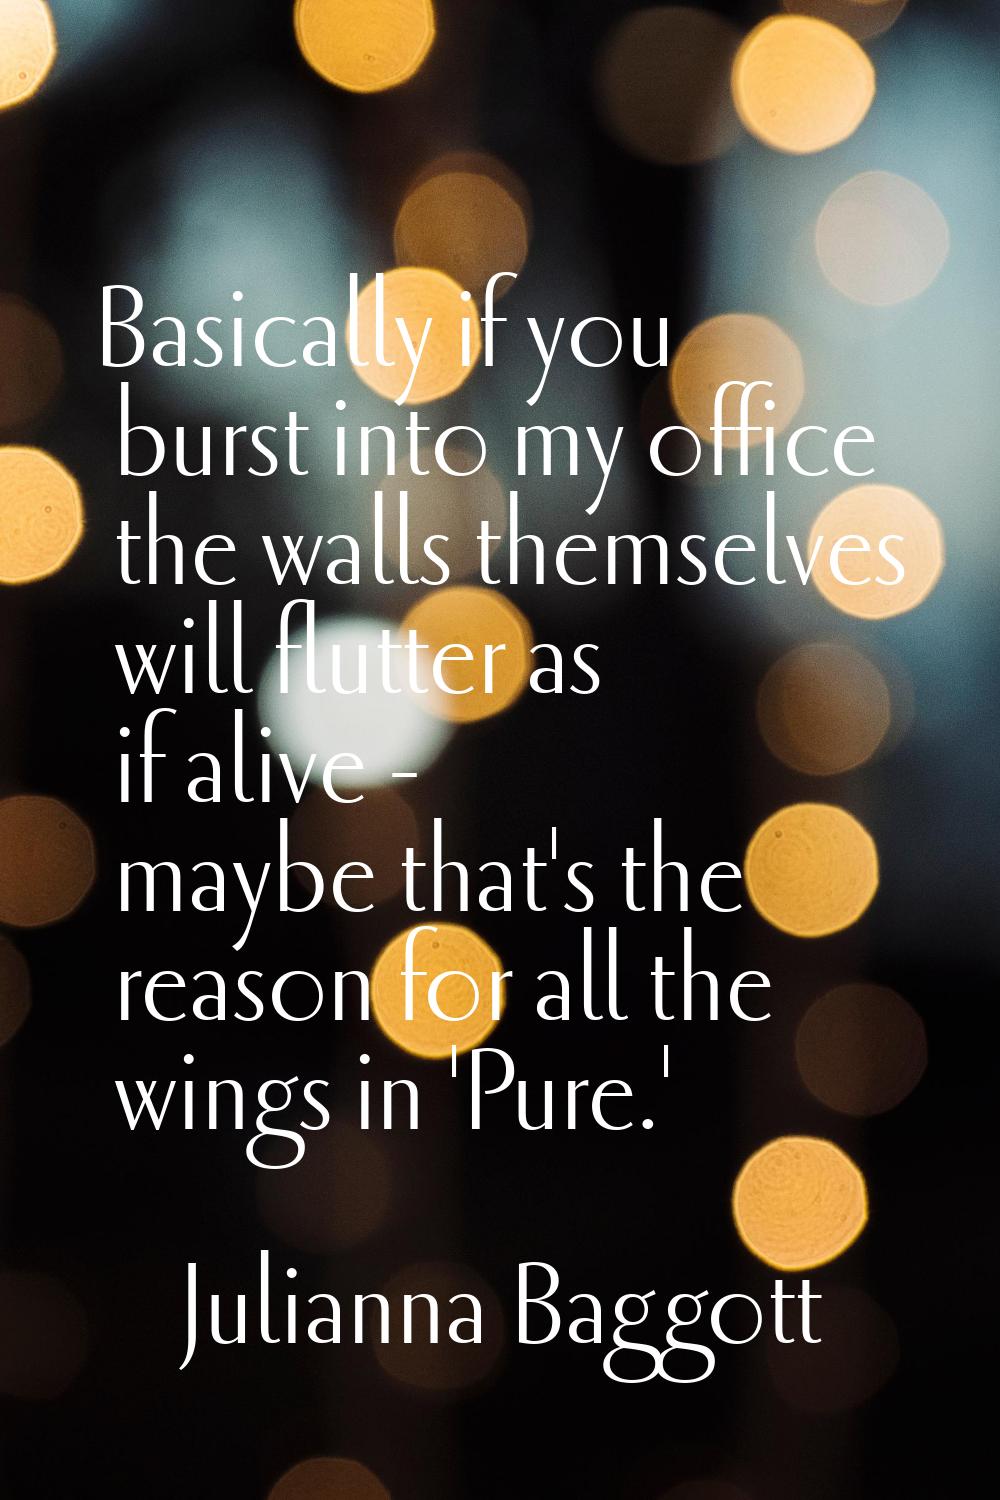 Basically if you burst into my office the walls themselves will flutter as if alive - maybe that's 